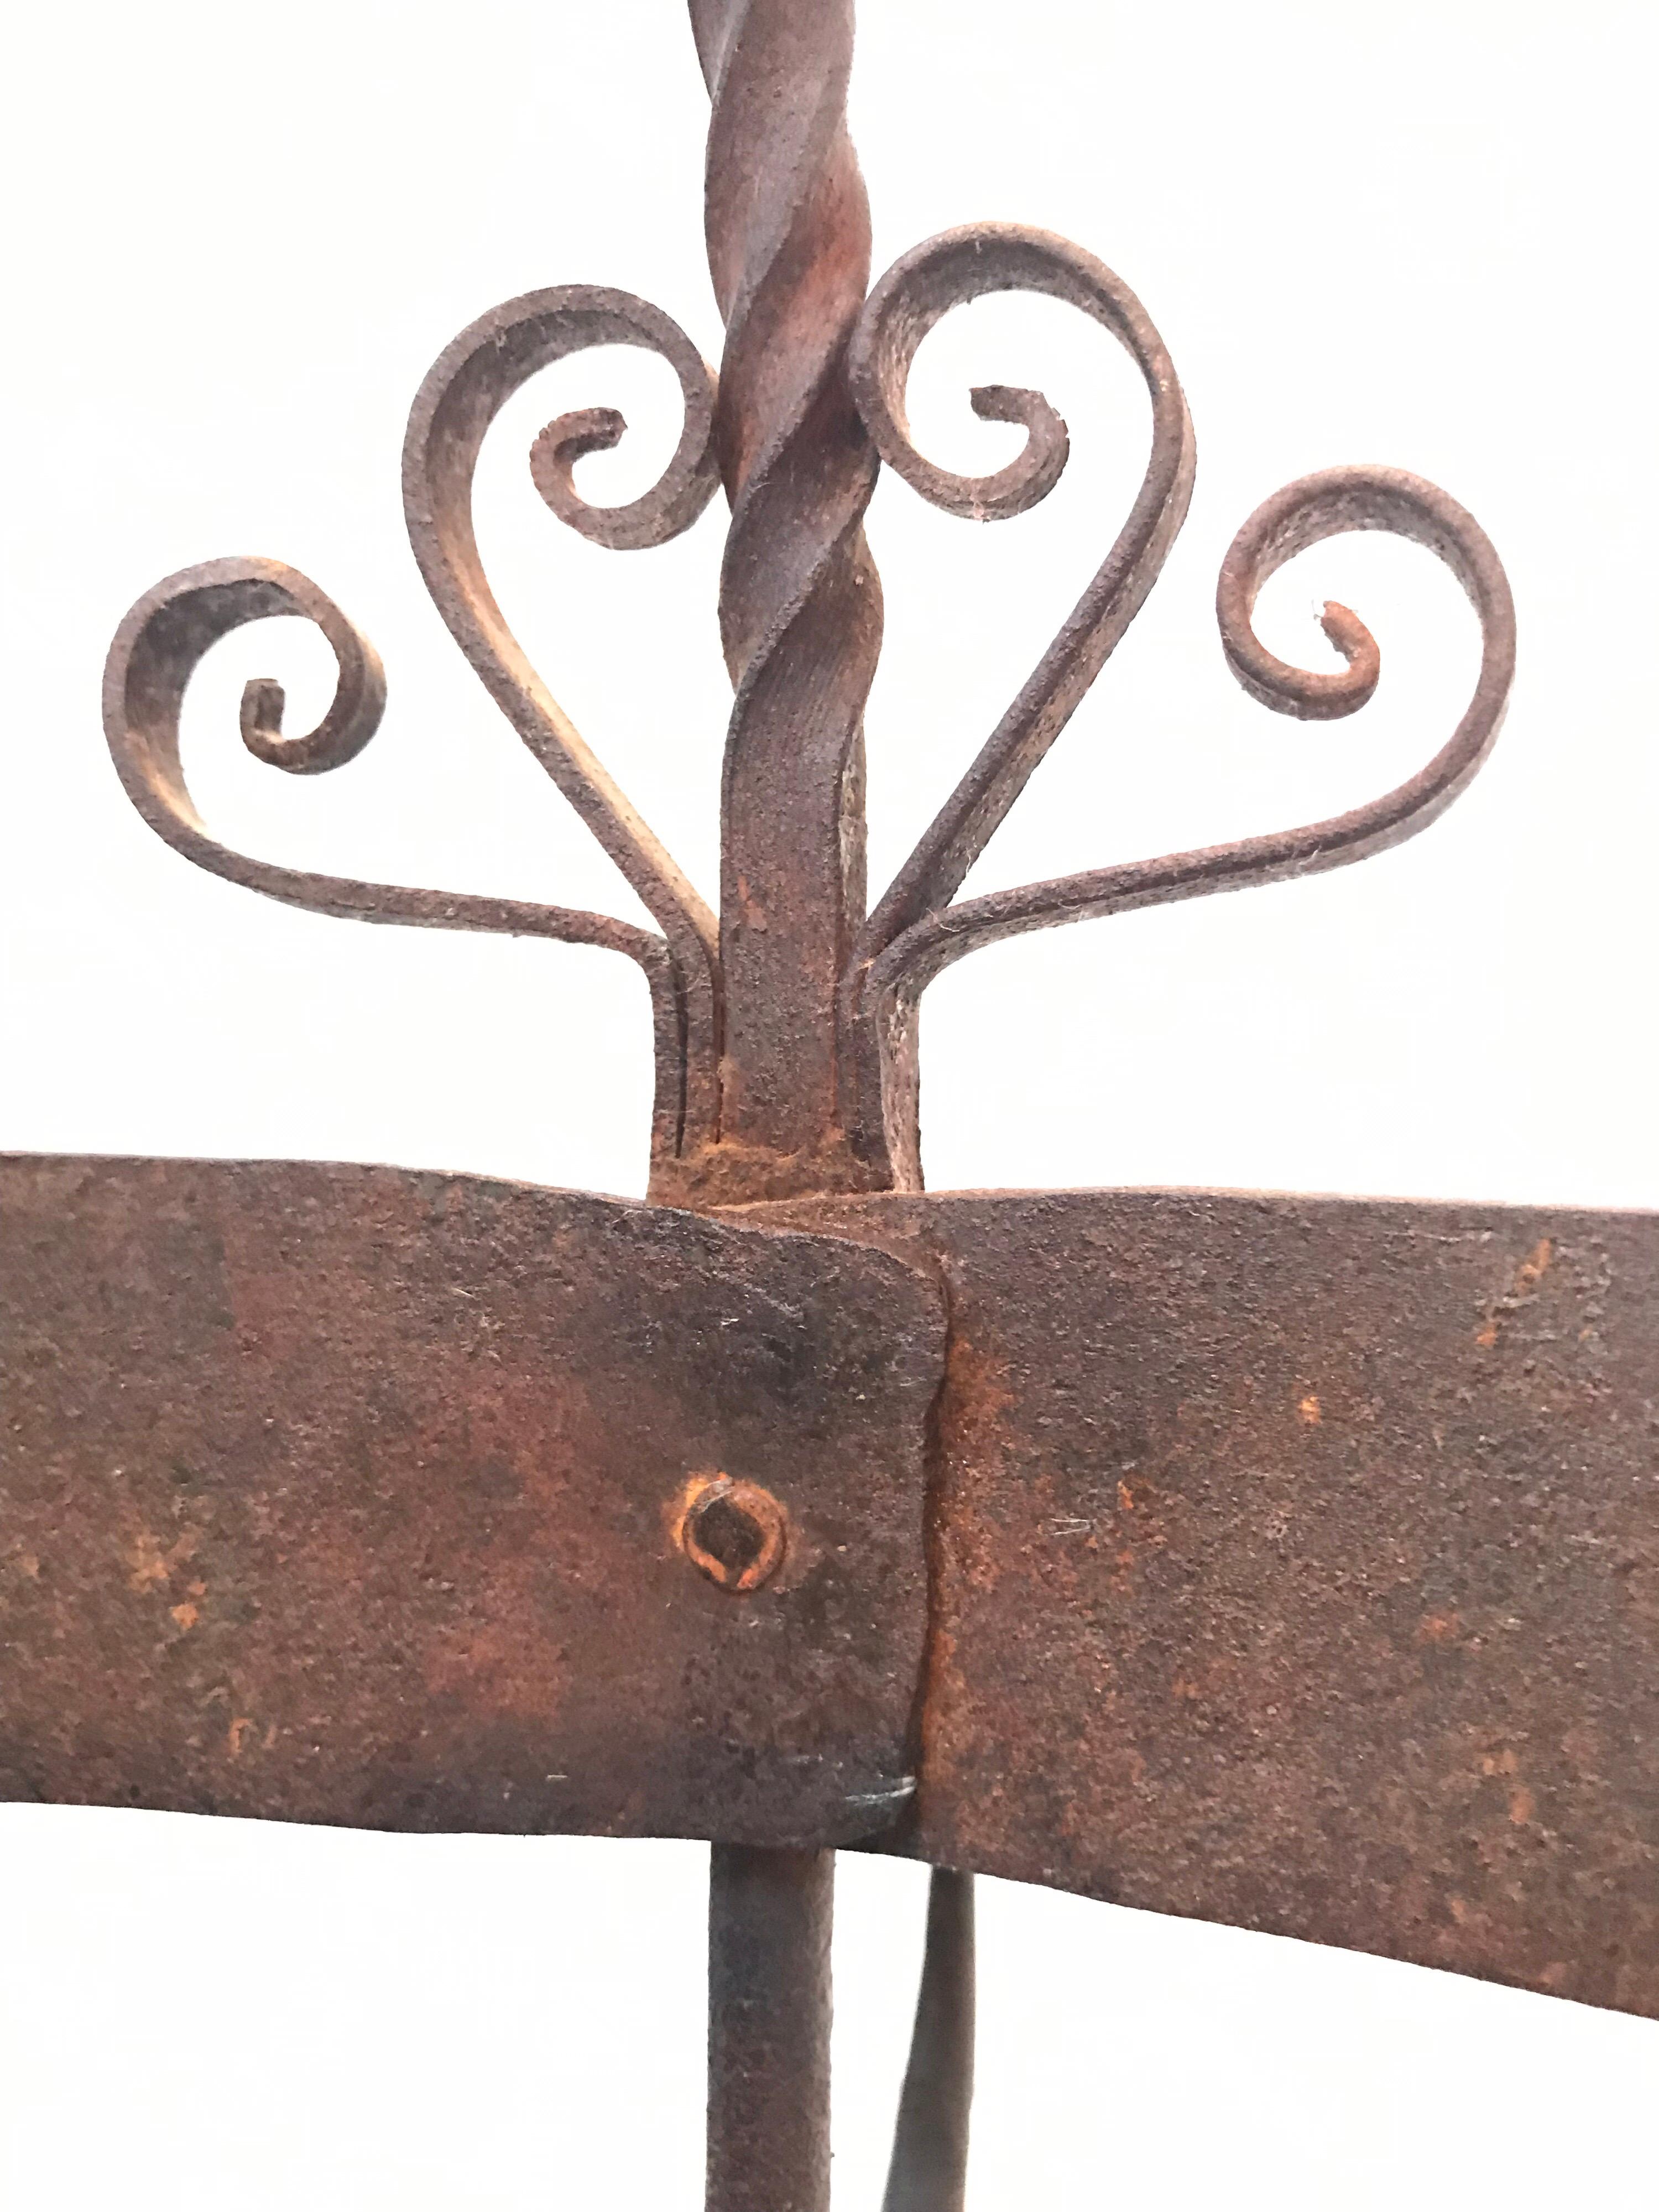 Antique blacksmiths forged steel game hook
Skillfully made and with beautiful details
8 game hooks and decorated with 4 birds
Lovely aging to the iron
Very decorative and useful item for your country kitchen.